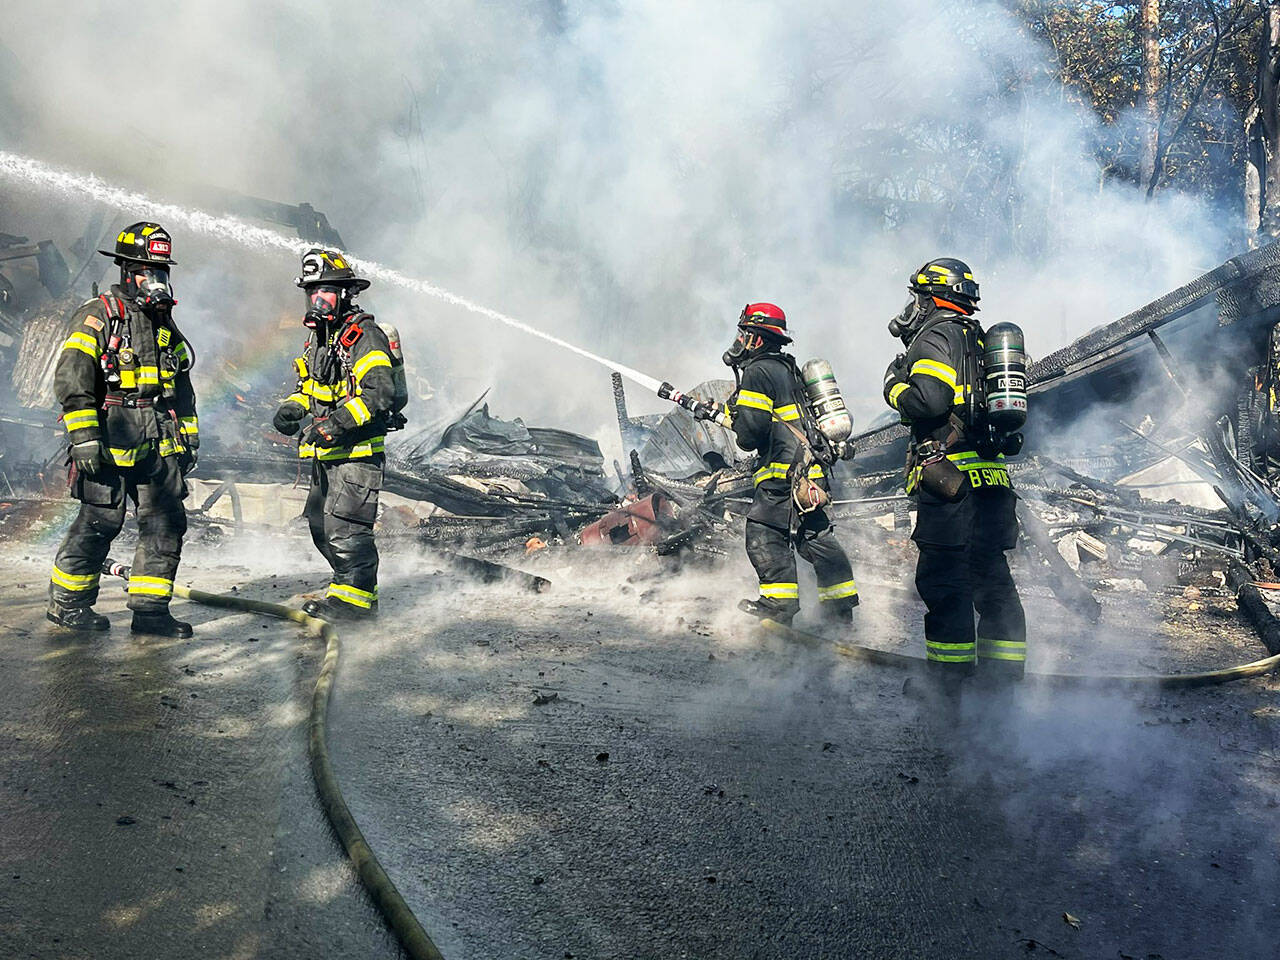 It took firefighters about an hour to extinguish the fire. COURTESY PHOTO, Puget Sound Fire